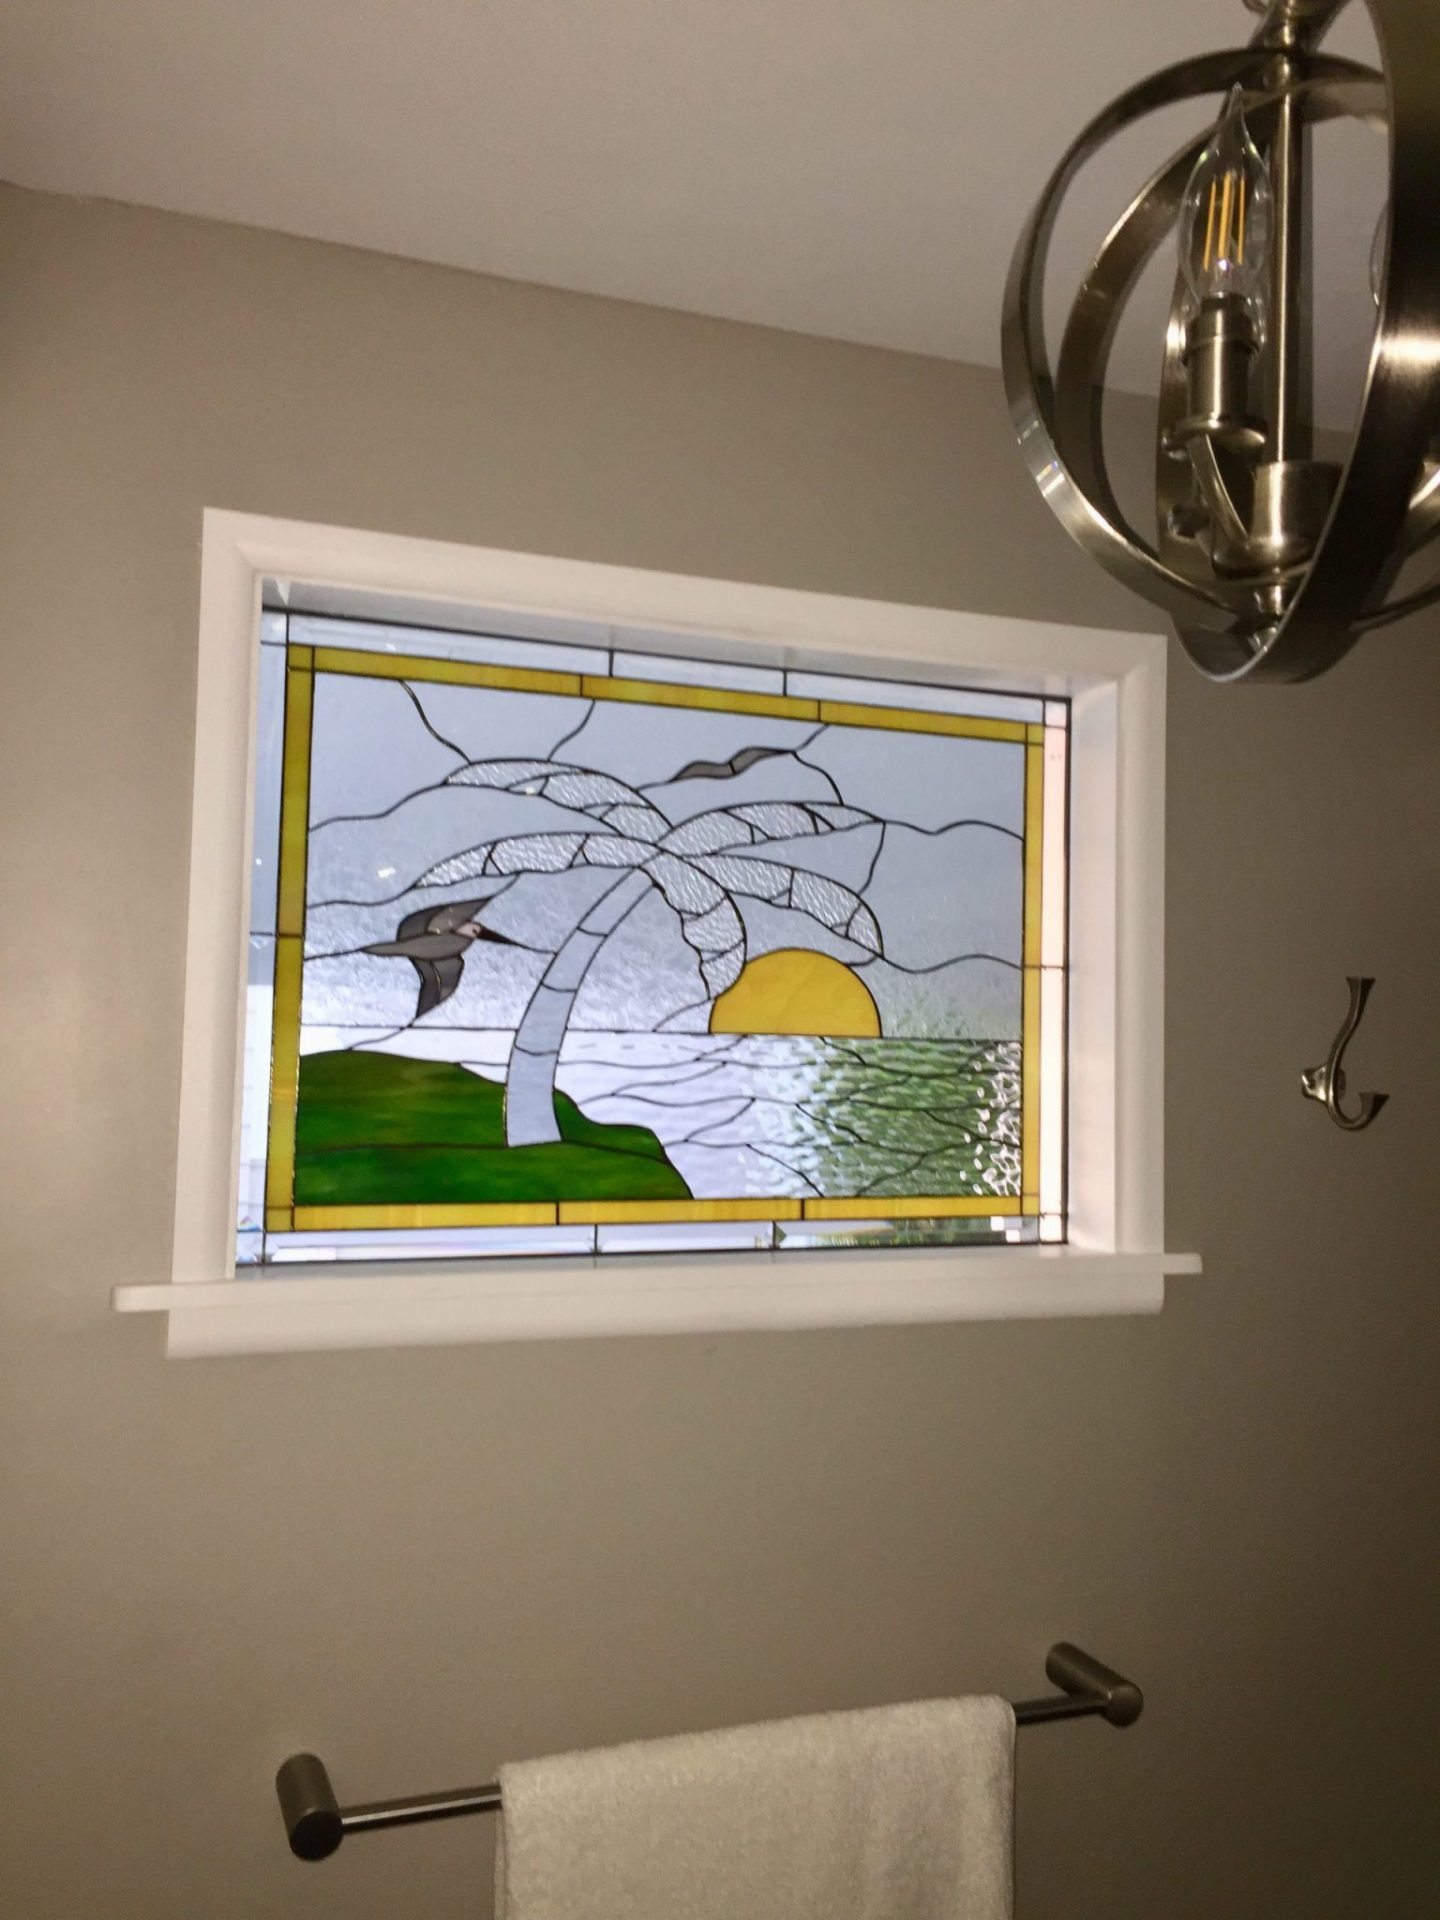 Beautiful palm tree and seagull window installed in bathroom for natural light and beauty!